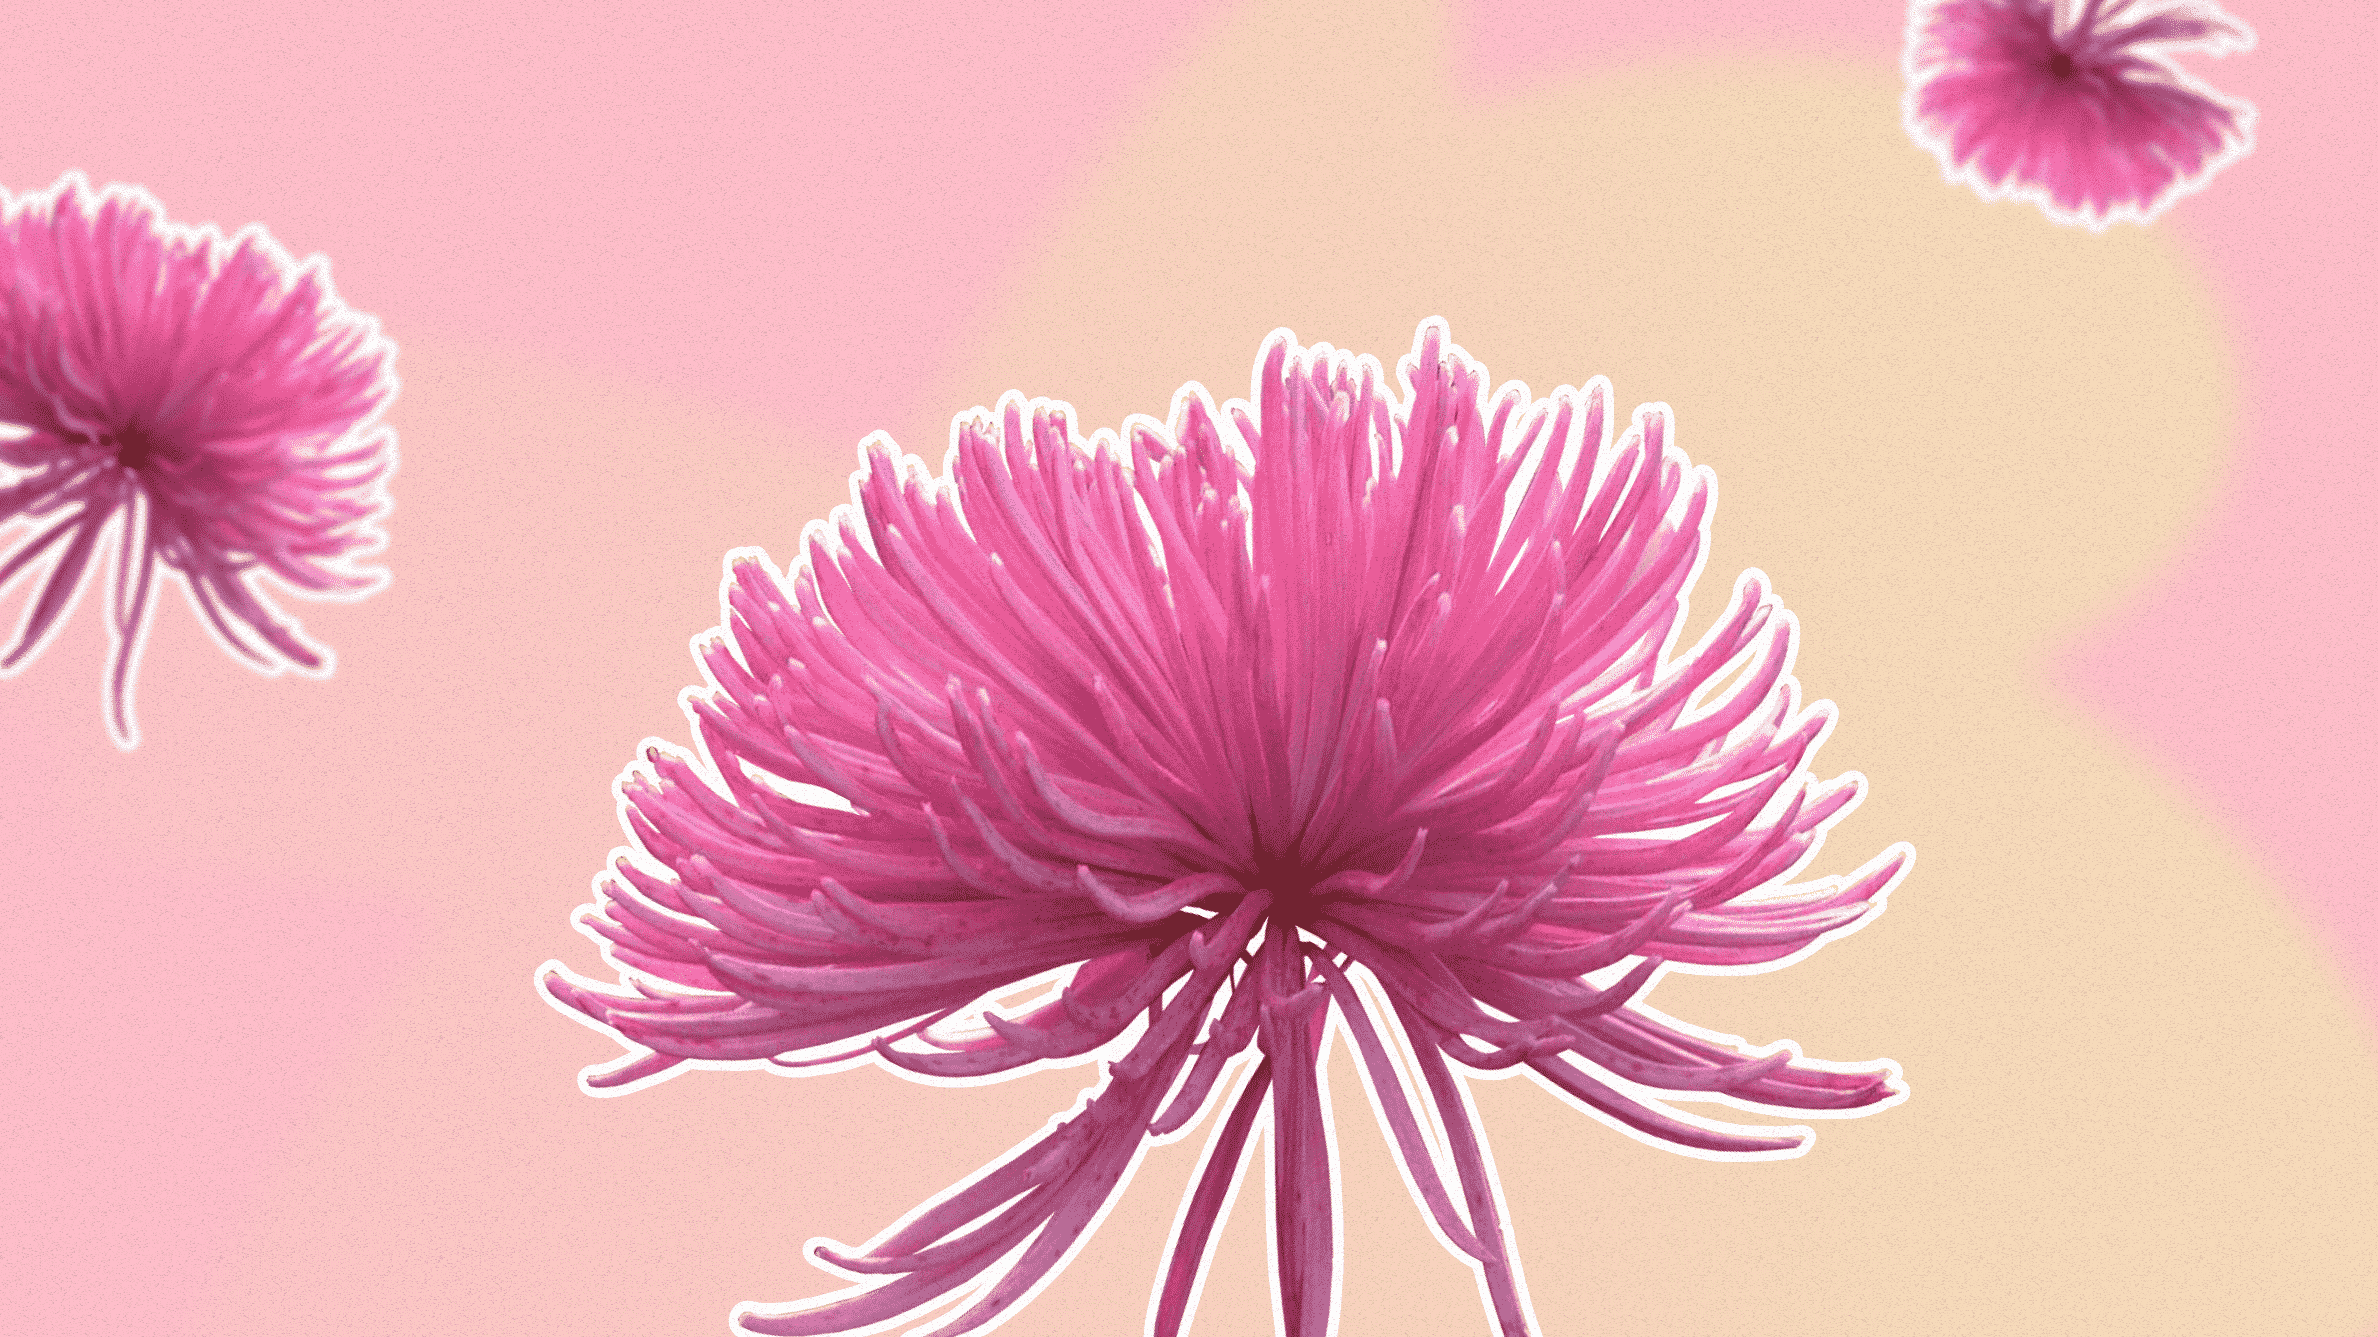 Pink aster flower meaning